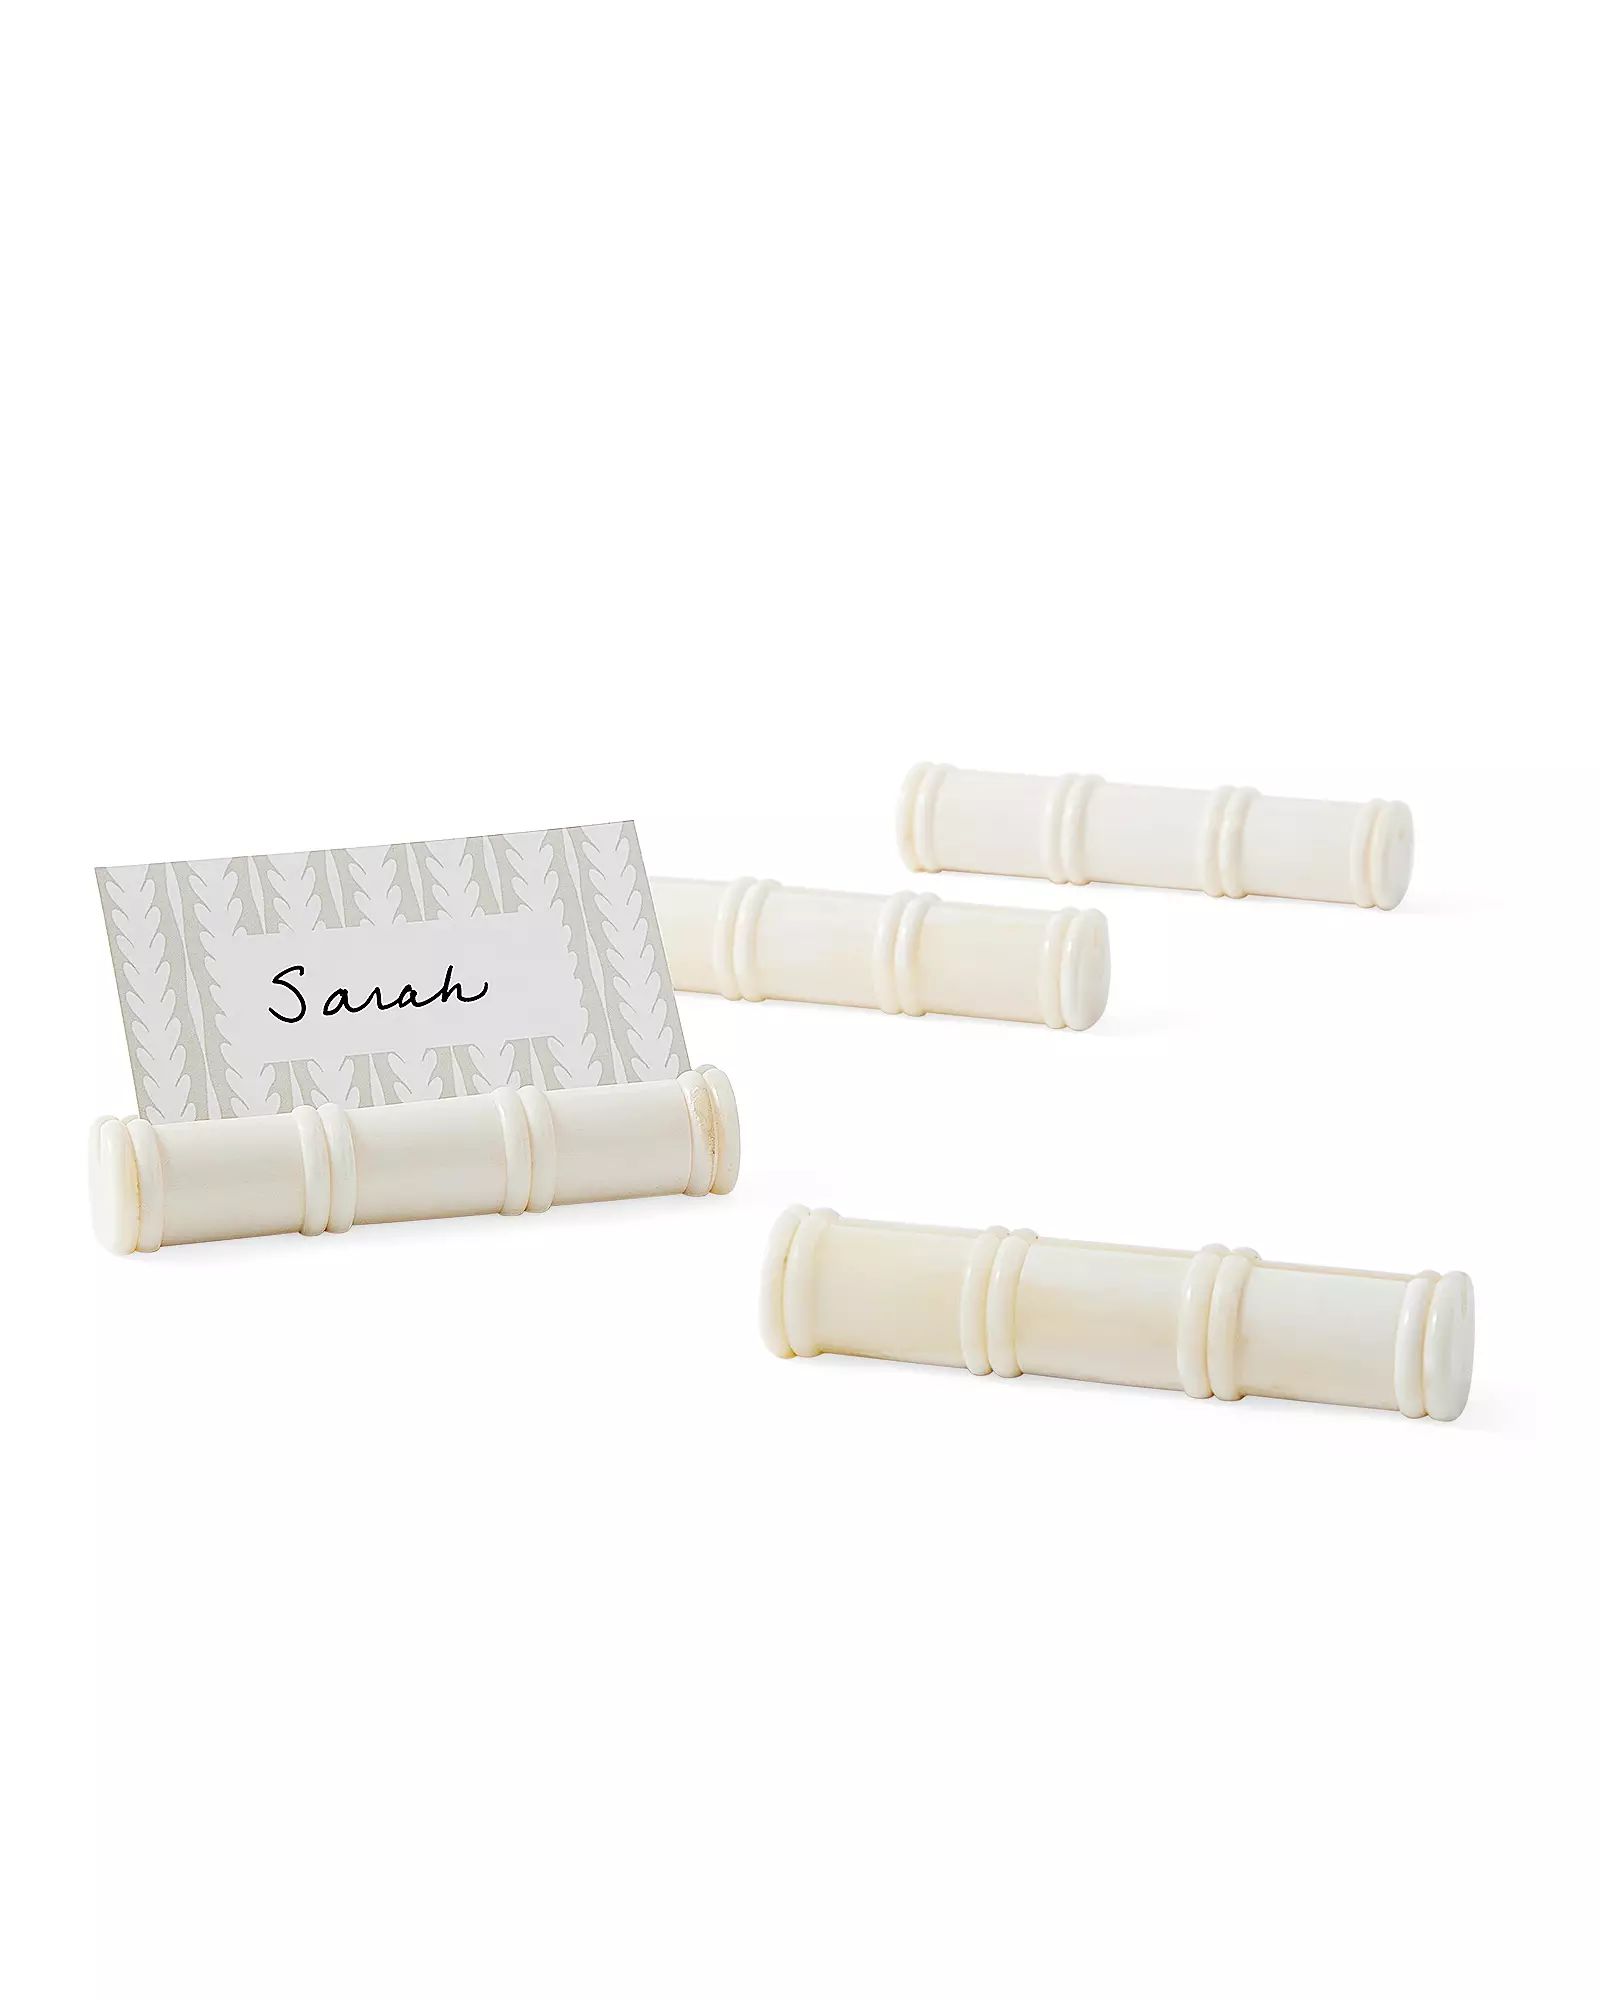 Bone Placecard Holder (Set of 4) | Serena and Lily